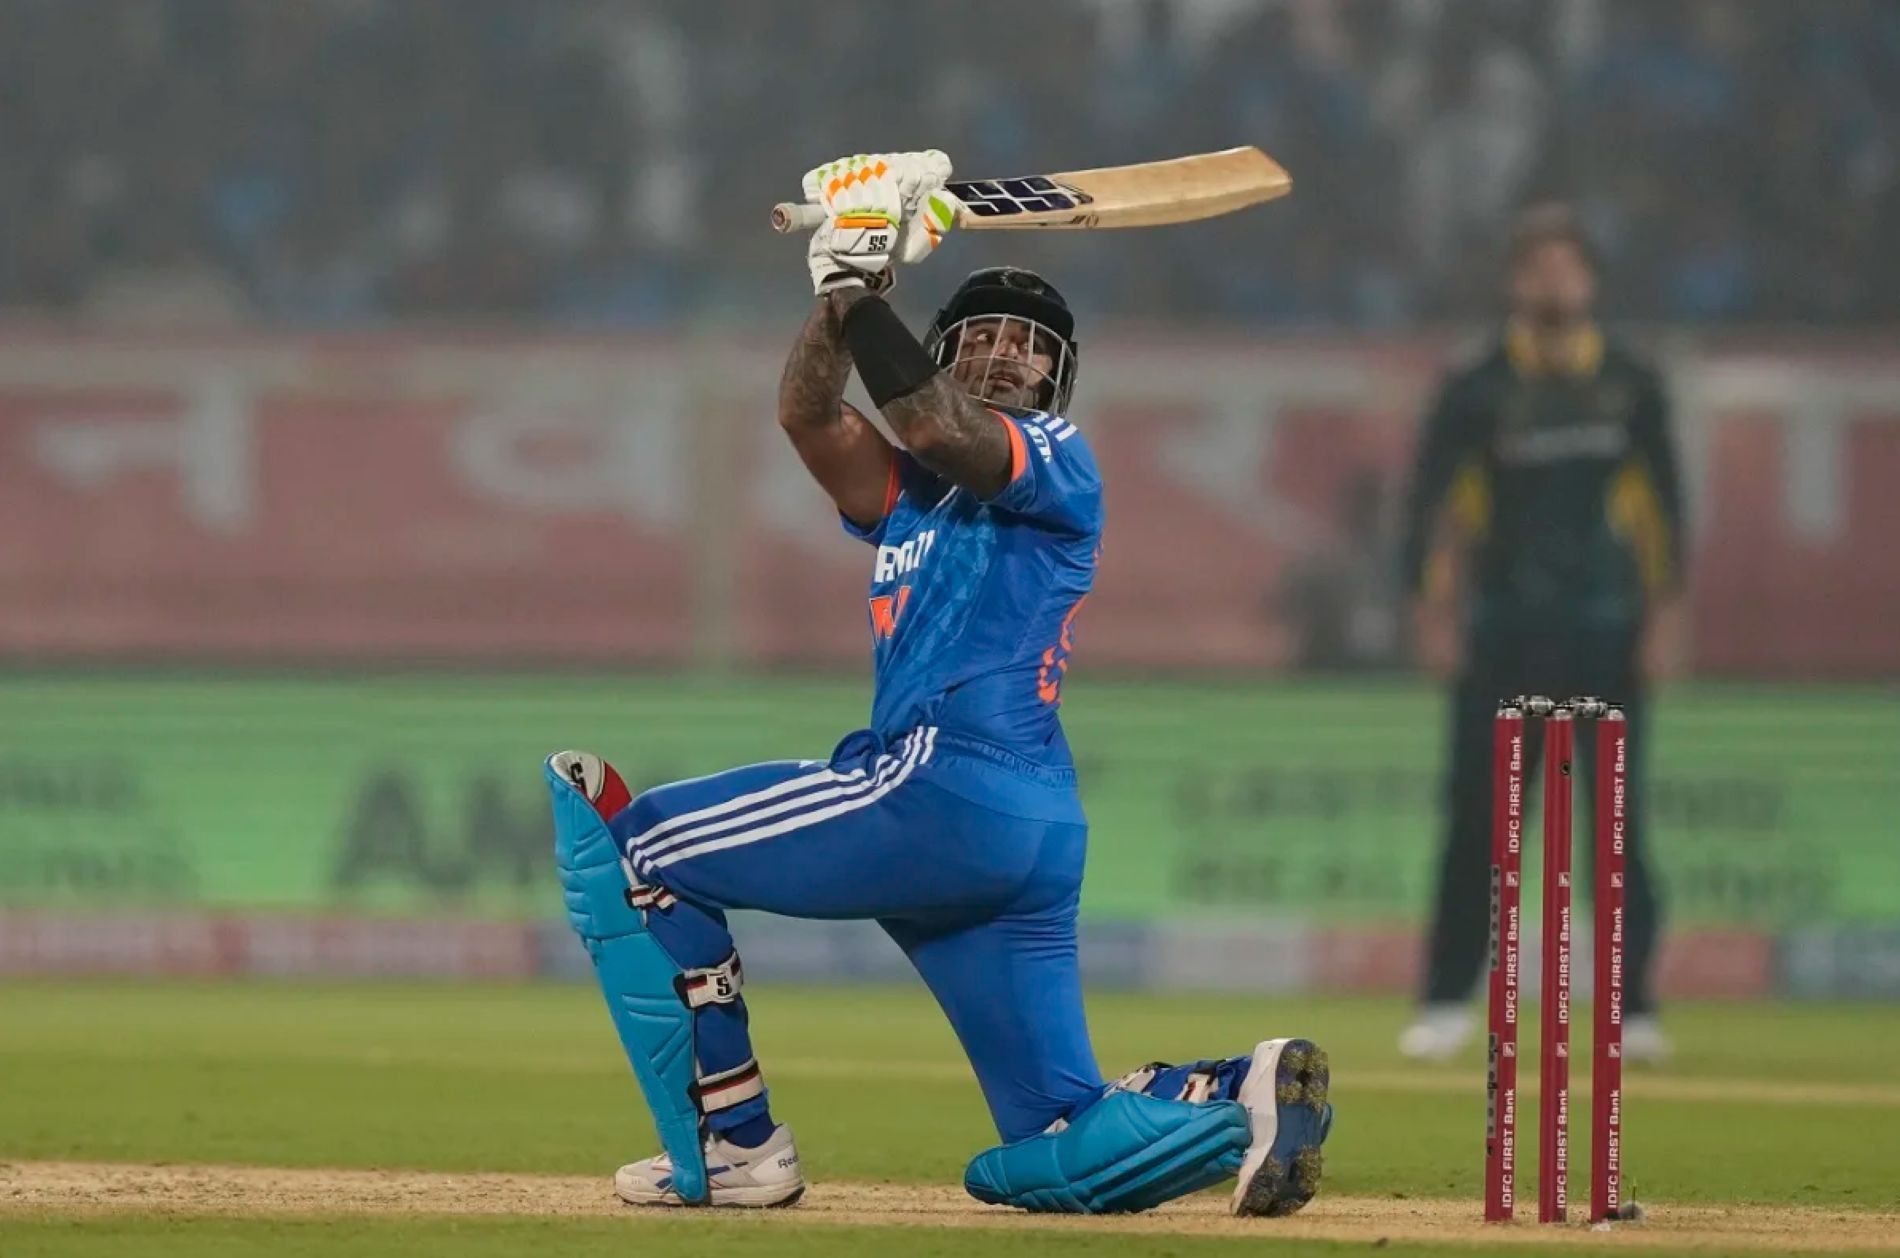 Surya was in his elements during the first T20 against Australia